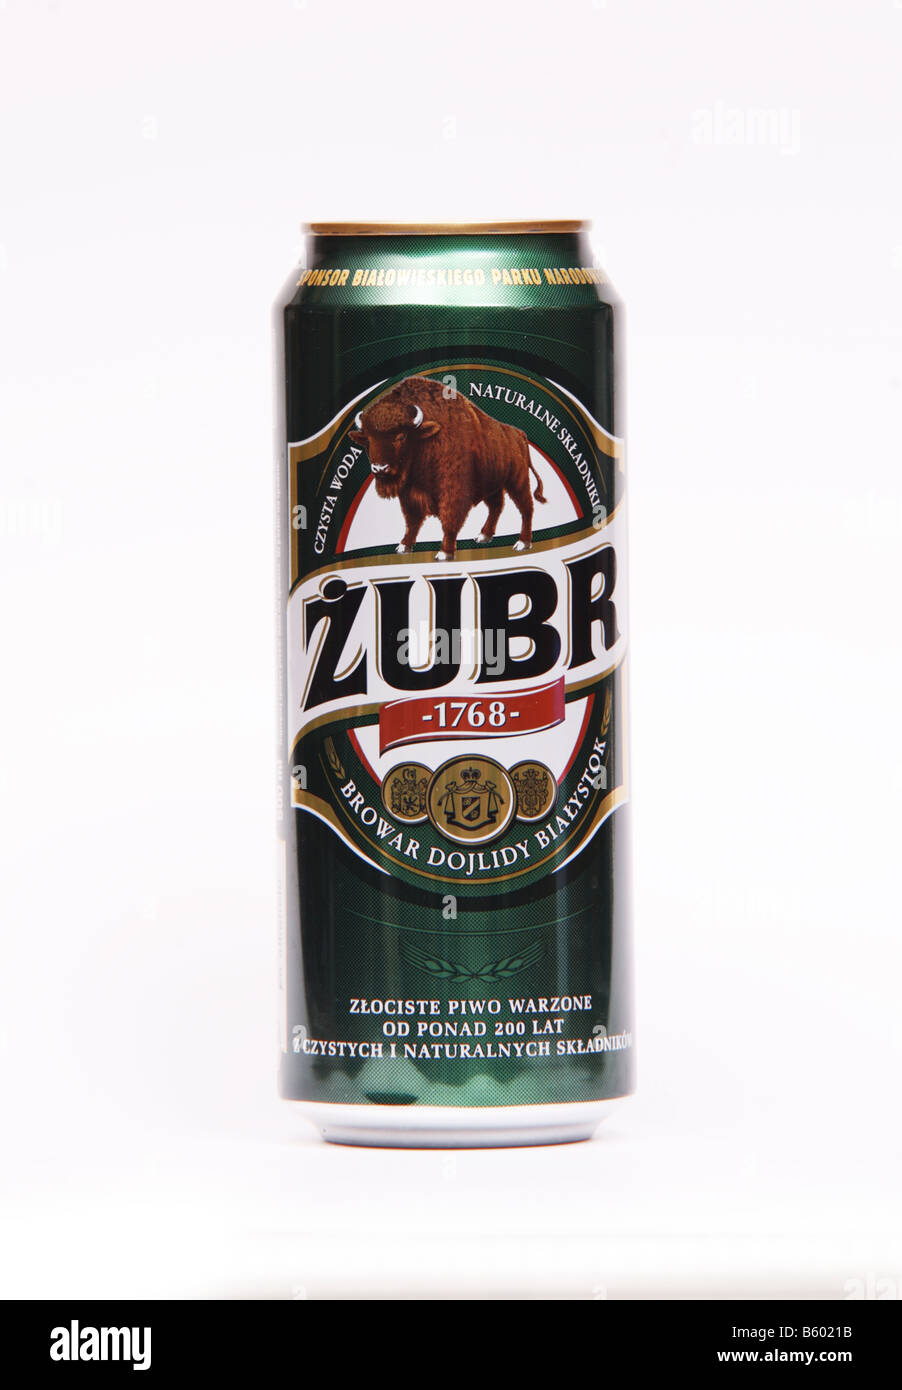 Can of Zubr Polish Lager Beer Stock Photo